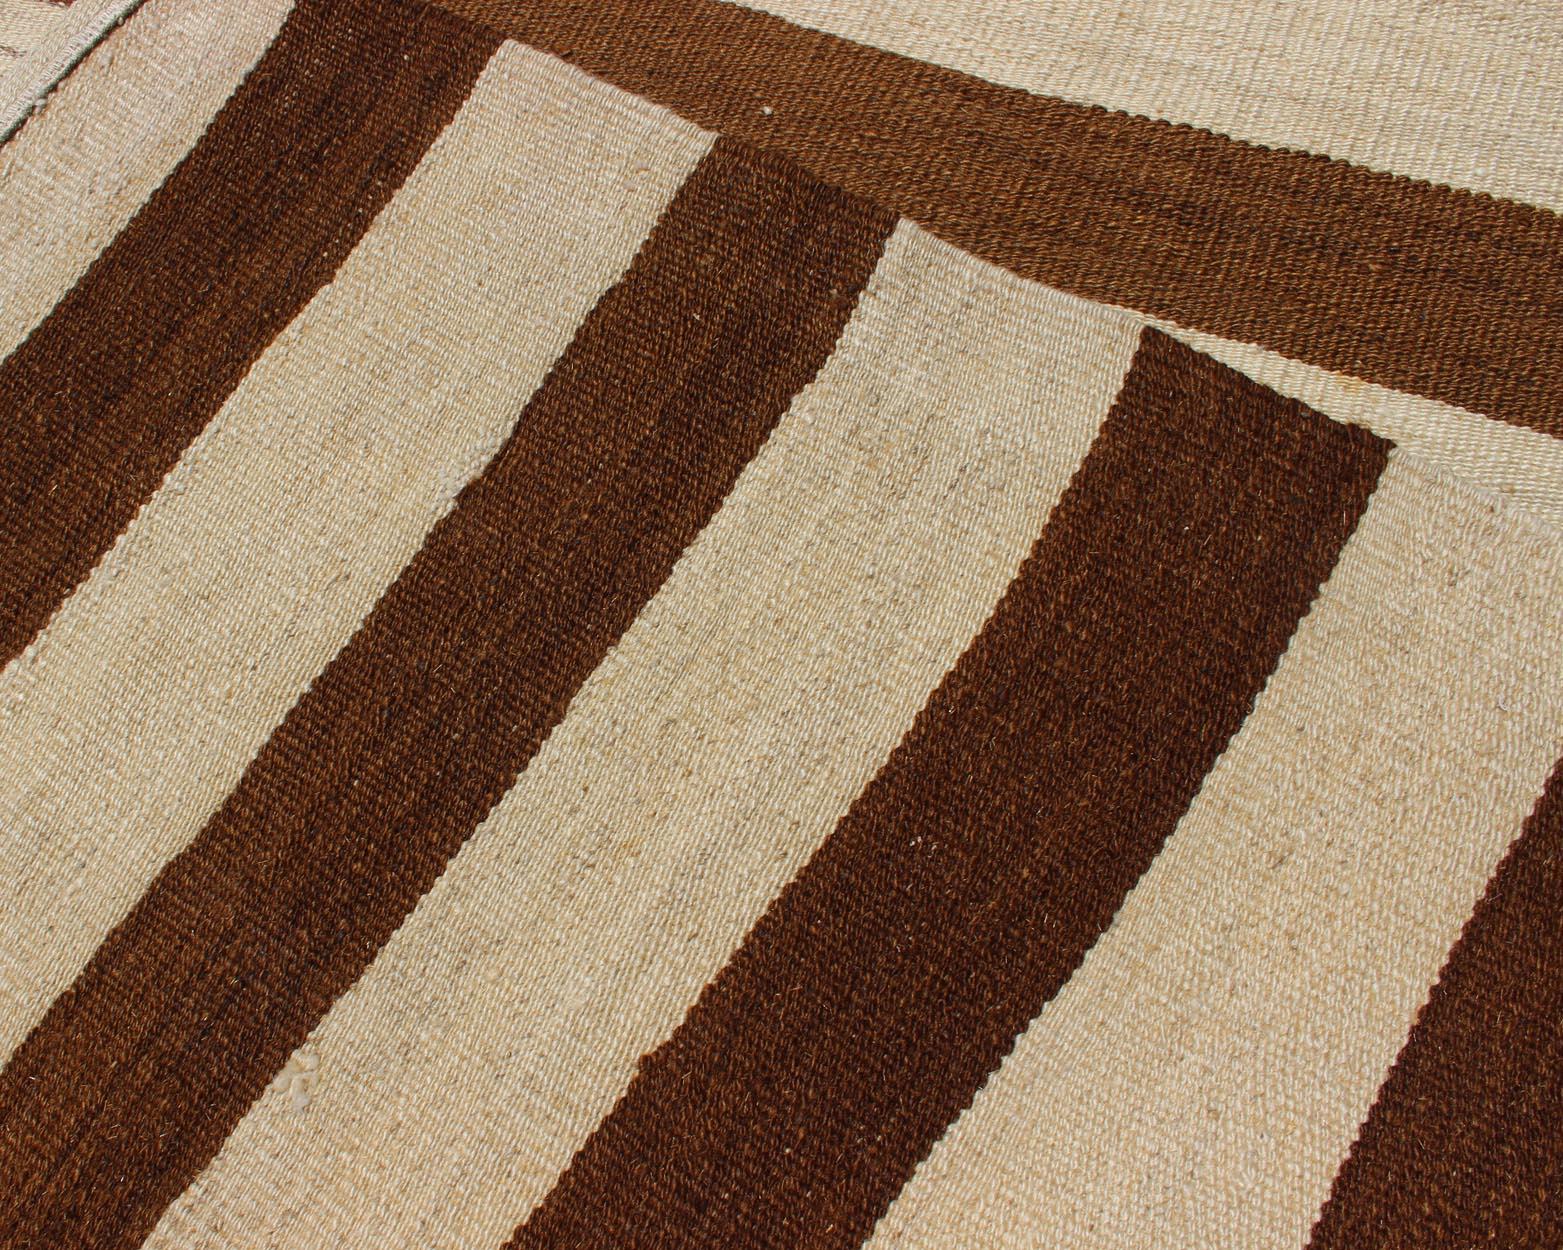 Long Vintage Kilim Runner with Brown and Ivory Stripes 2